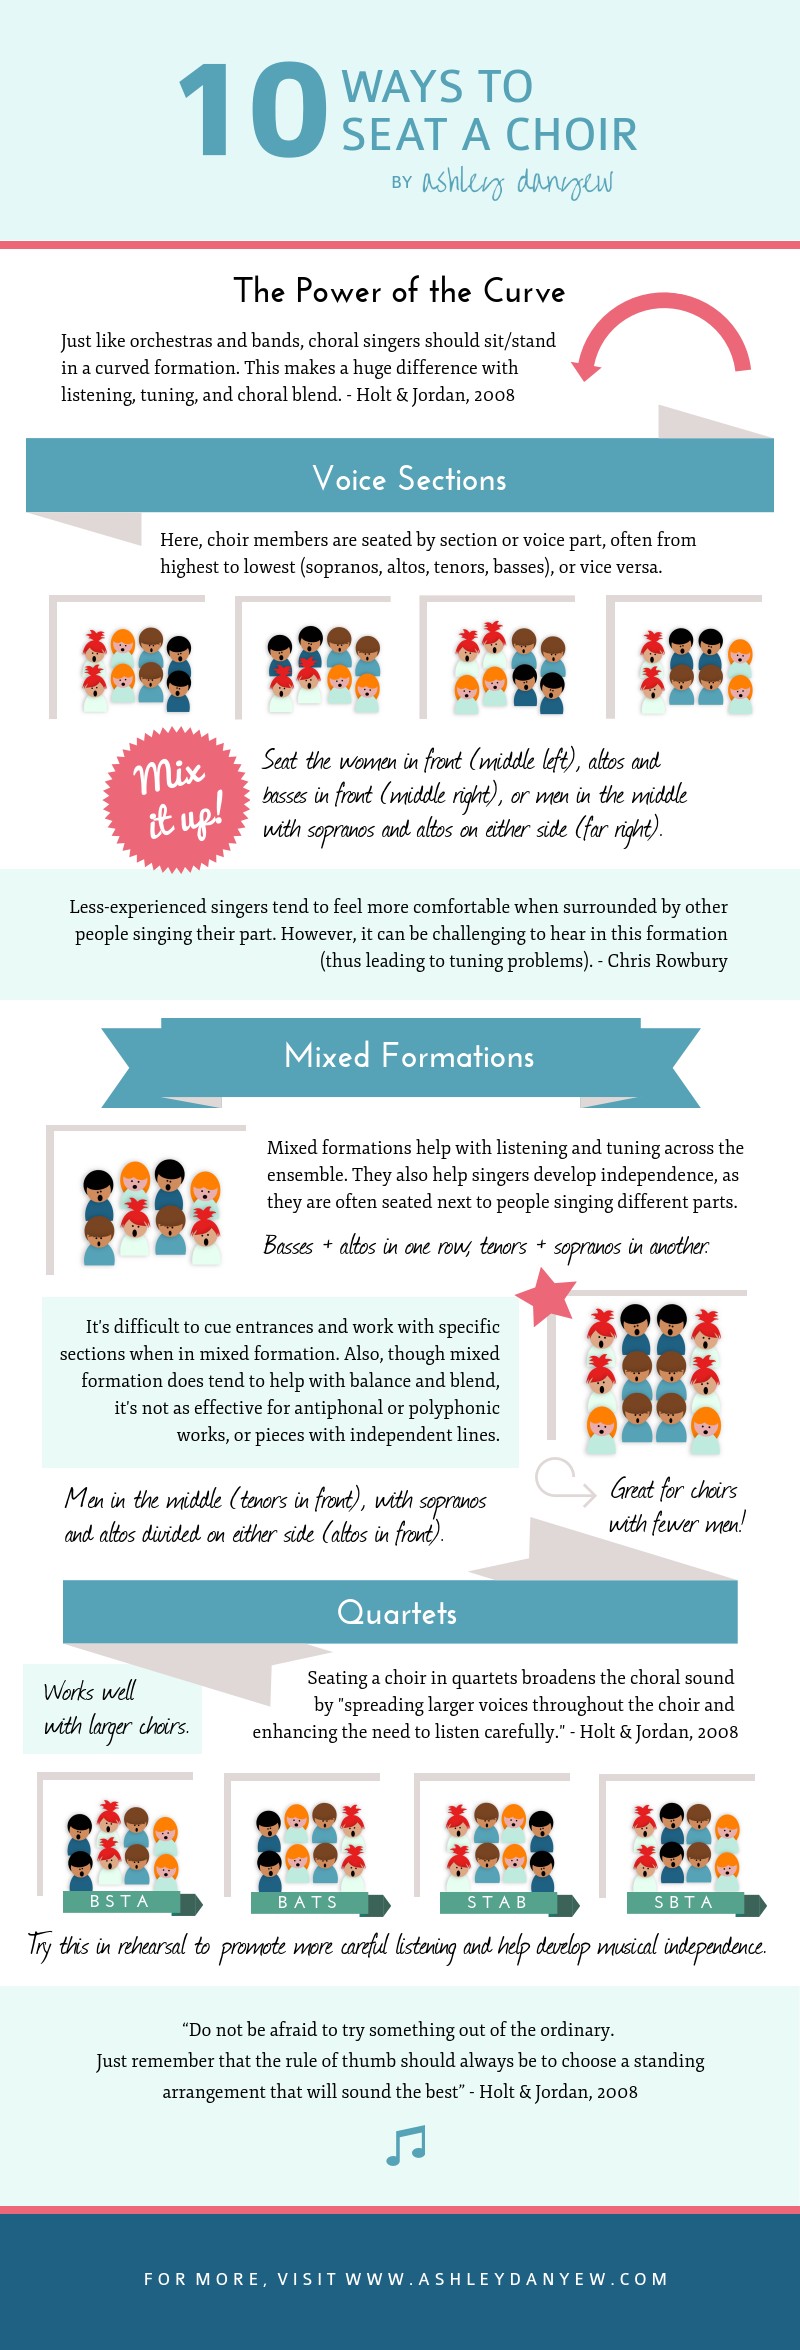 Copy of 10 Ways to Seat a Choir [Infographic]